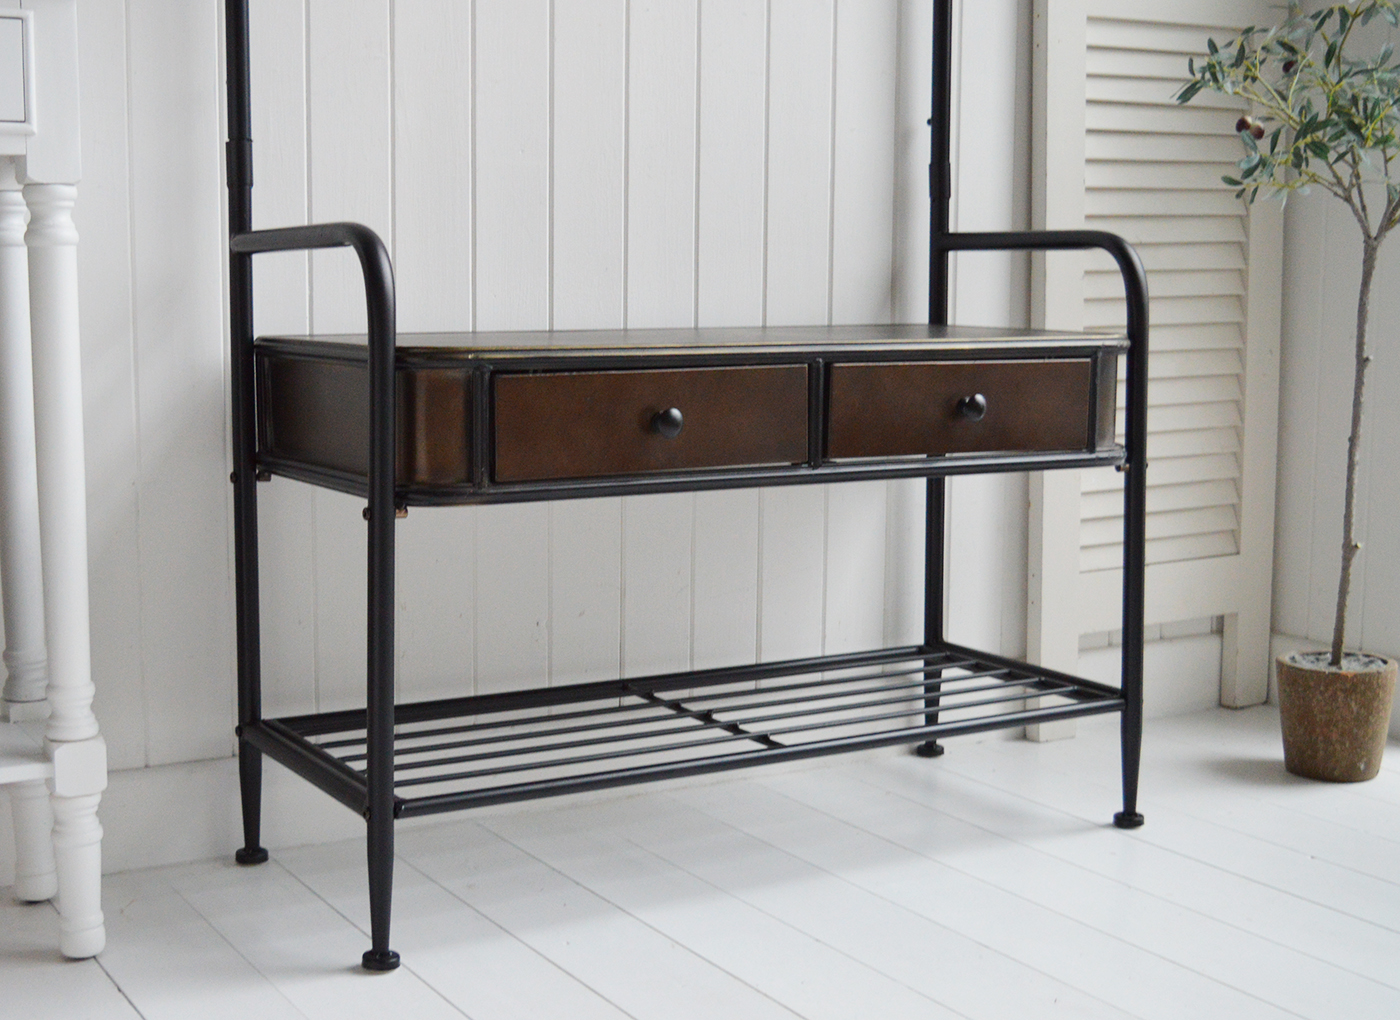 Windsor Hallway Stand - Bench Seat, shelf and Coat Rack for complete Hall Entry Way in antiqued black metal for modern farmhouse, coastal and country New England Interiors. Shows the bench seat part of the rack with the drawers 